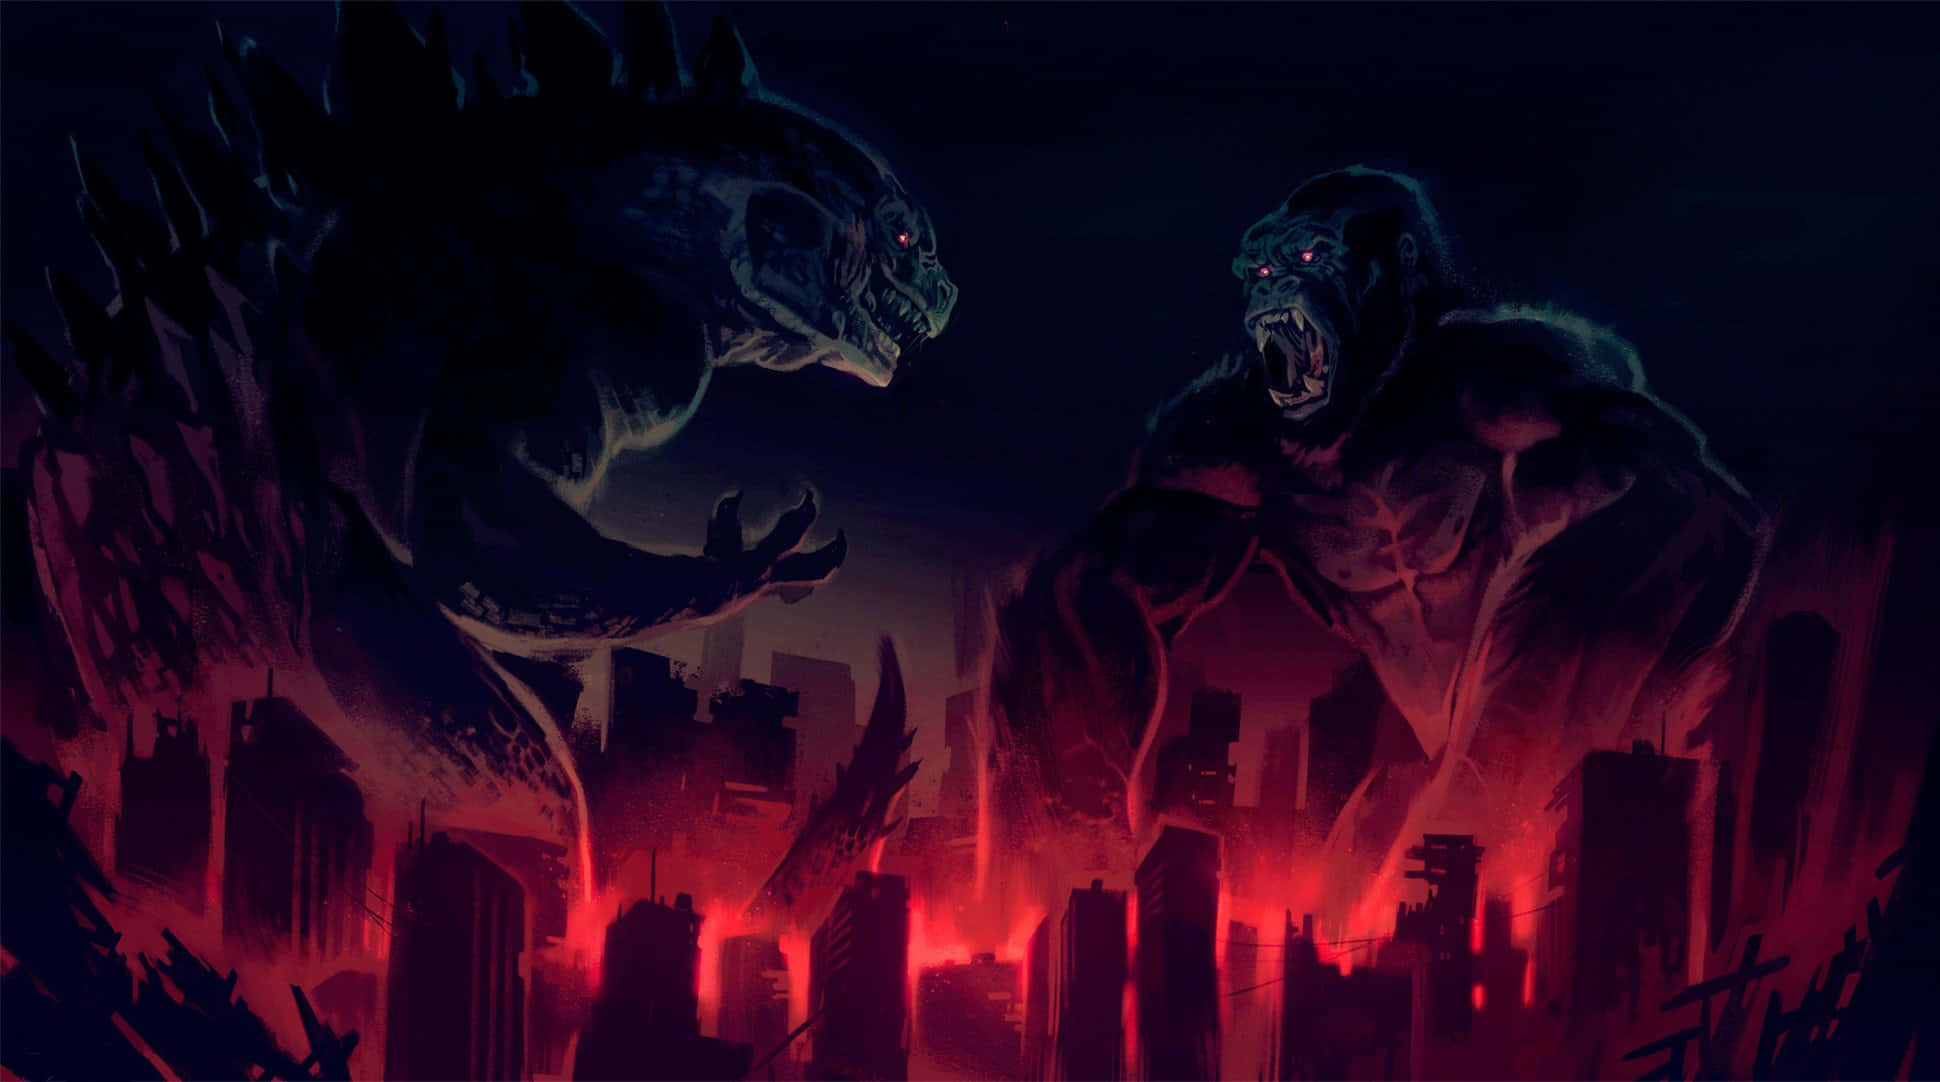 Godzilla and Kong face off in an epic battle